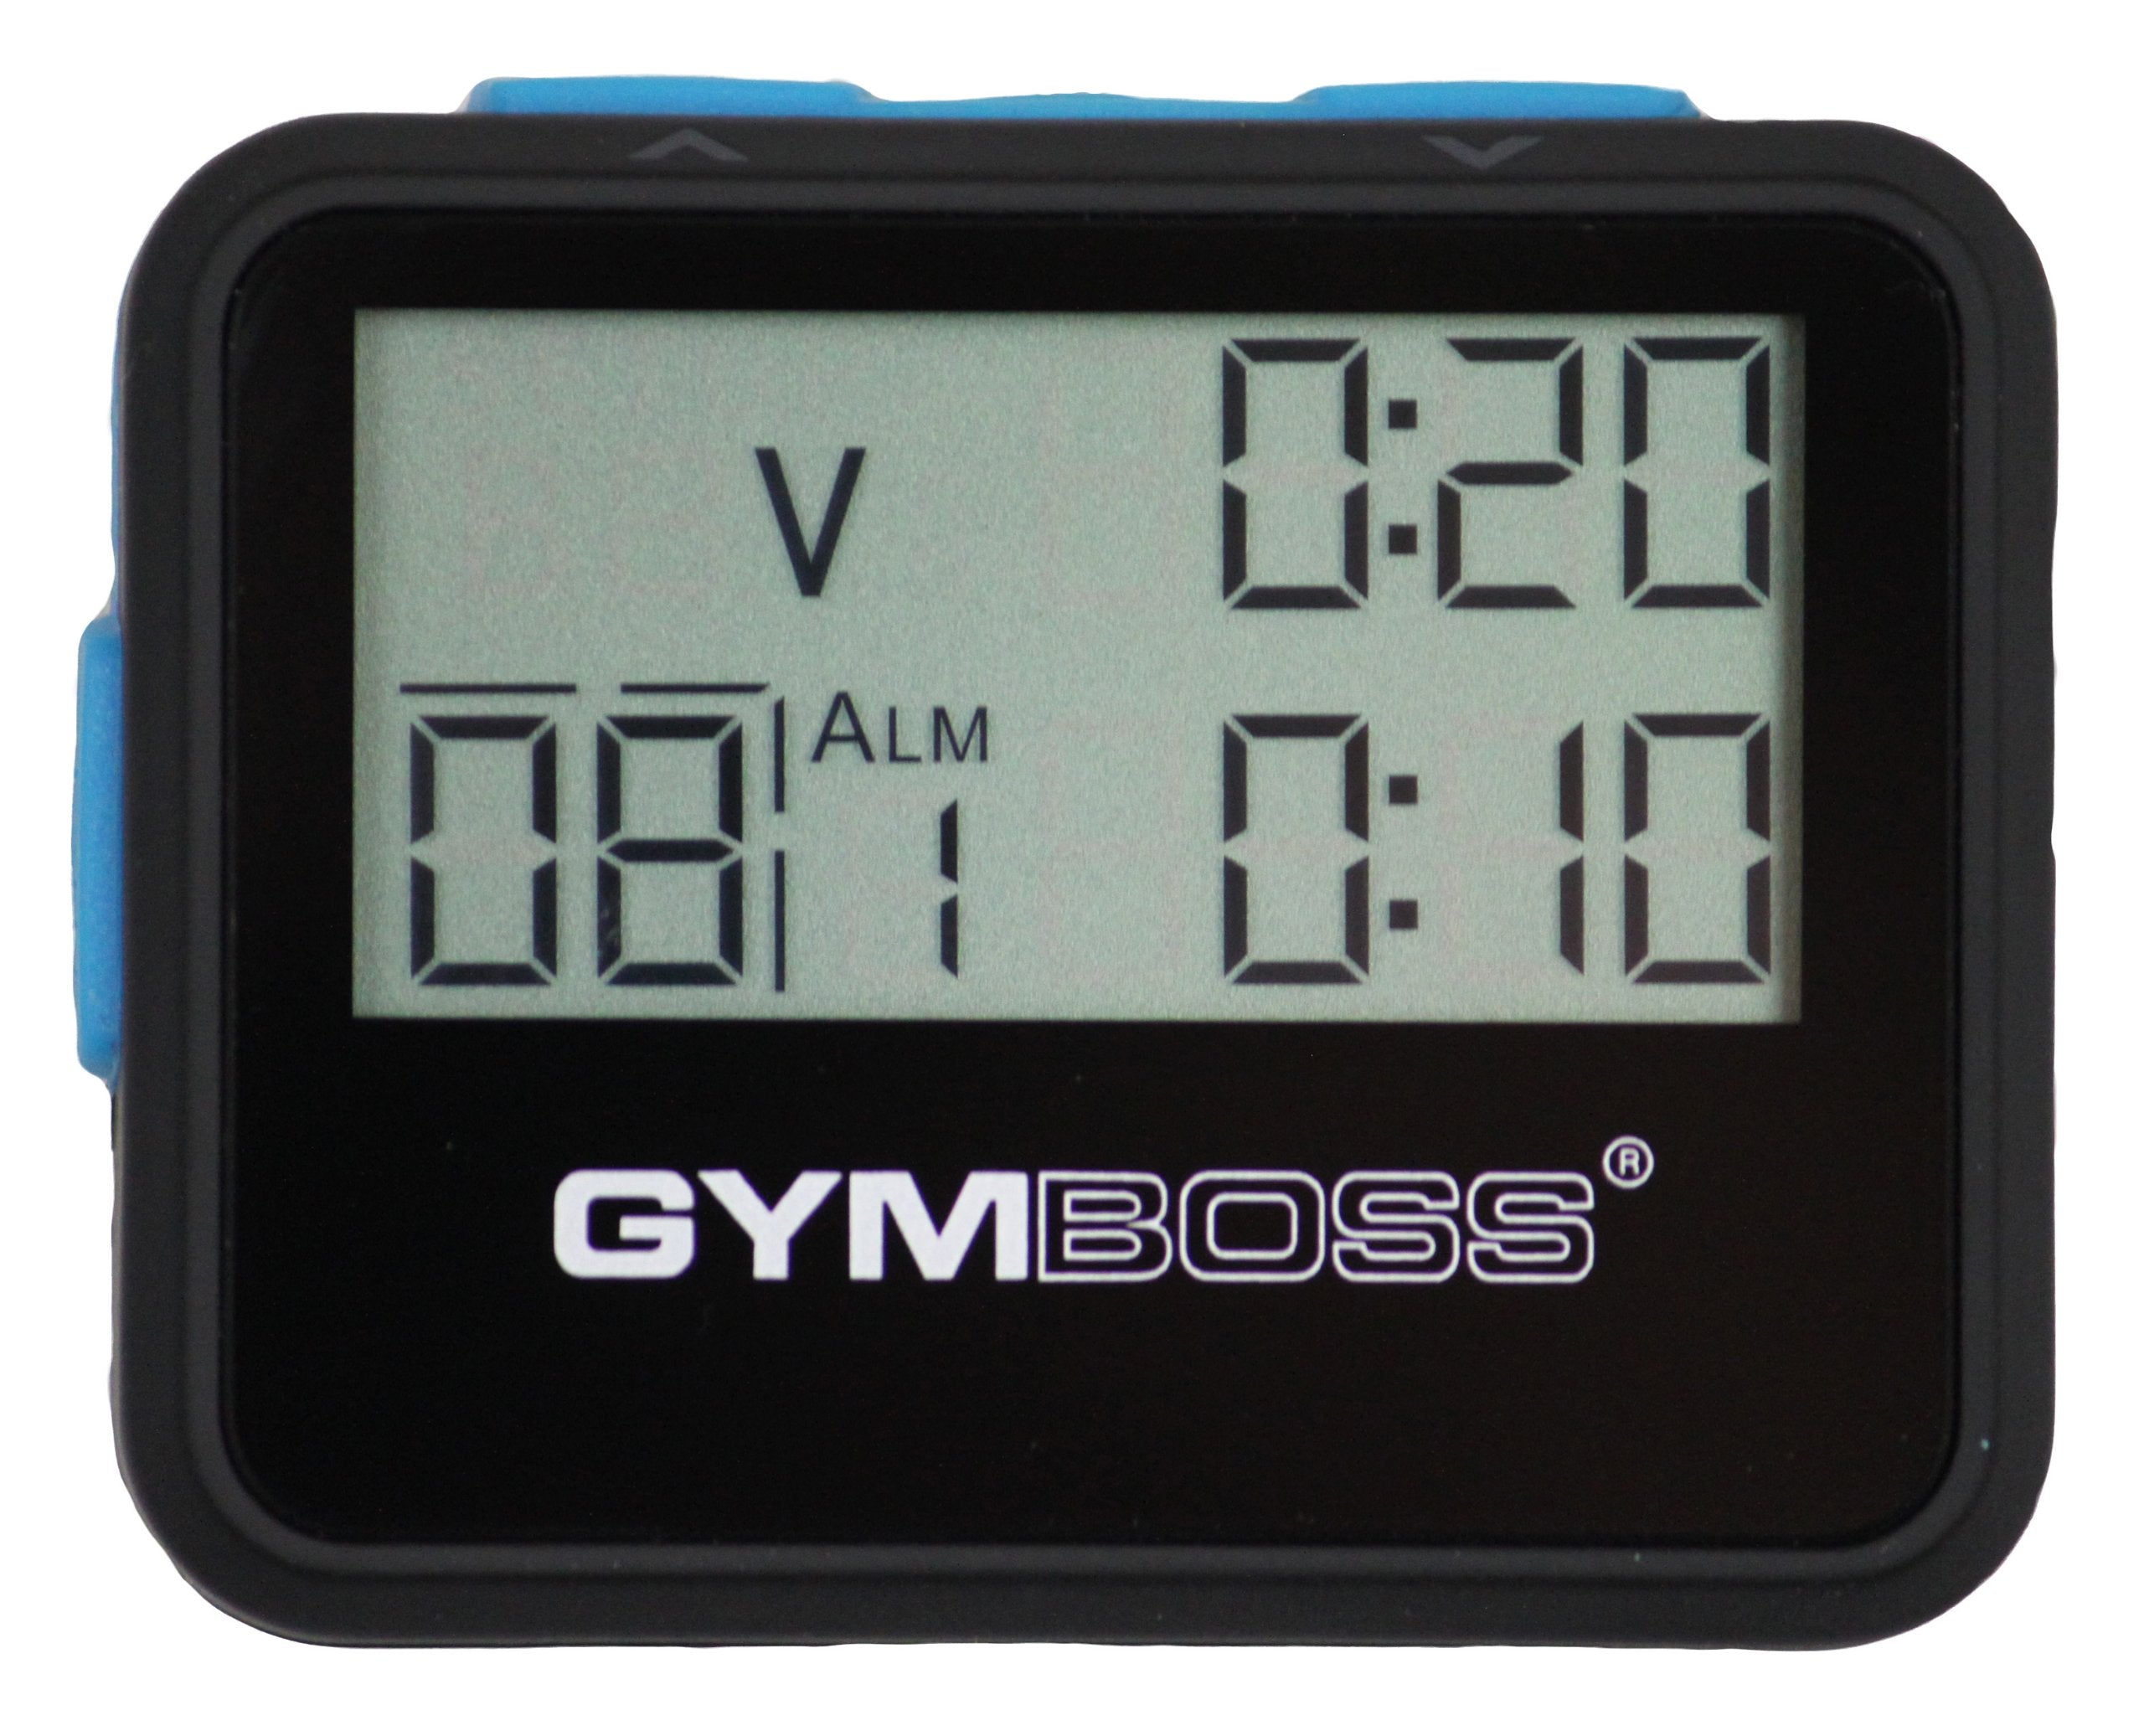 Gymboss Interval Timer and Stopwatch – Soft Coating Black/Blue